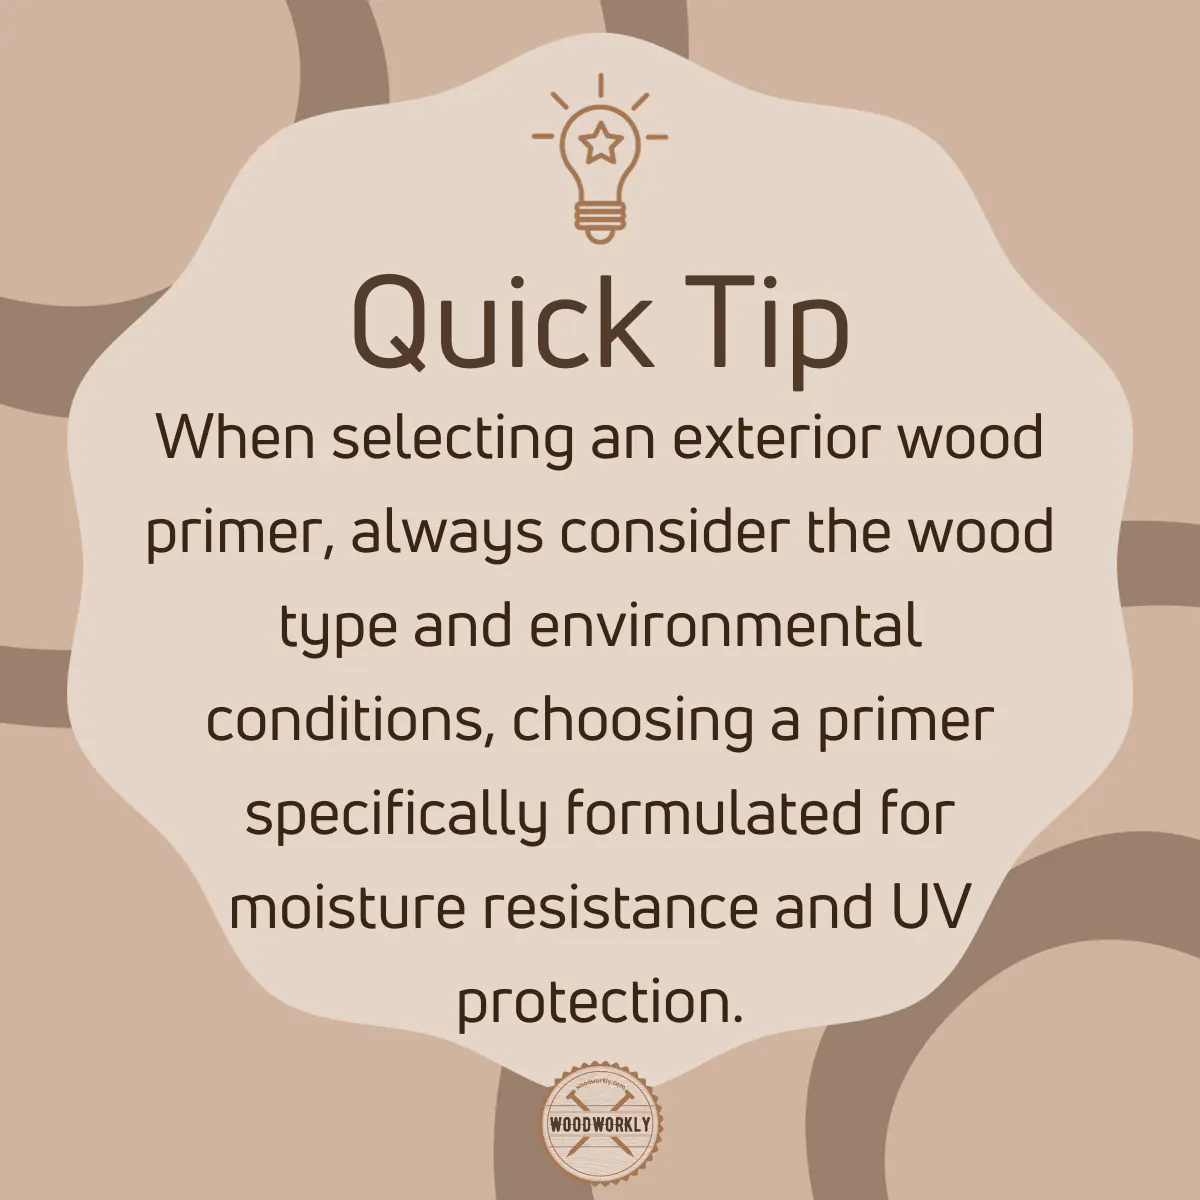 Tip for selecting an exterior wood primer